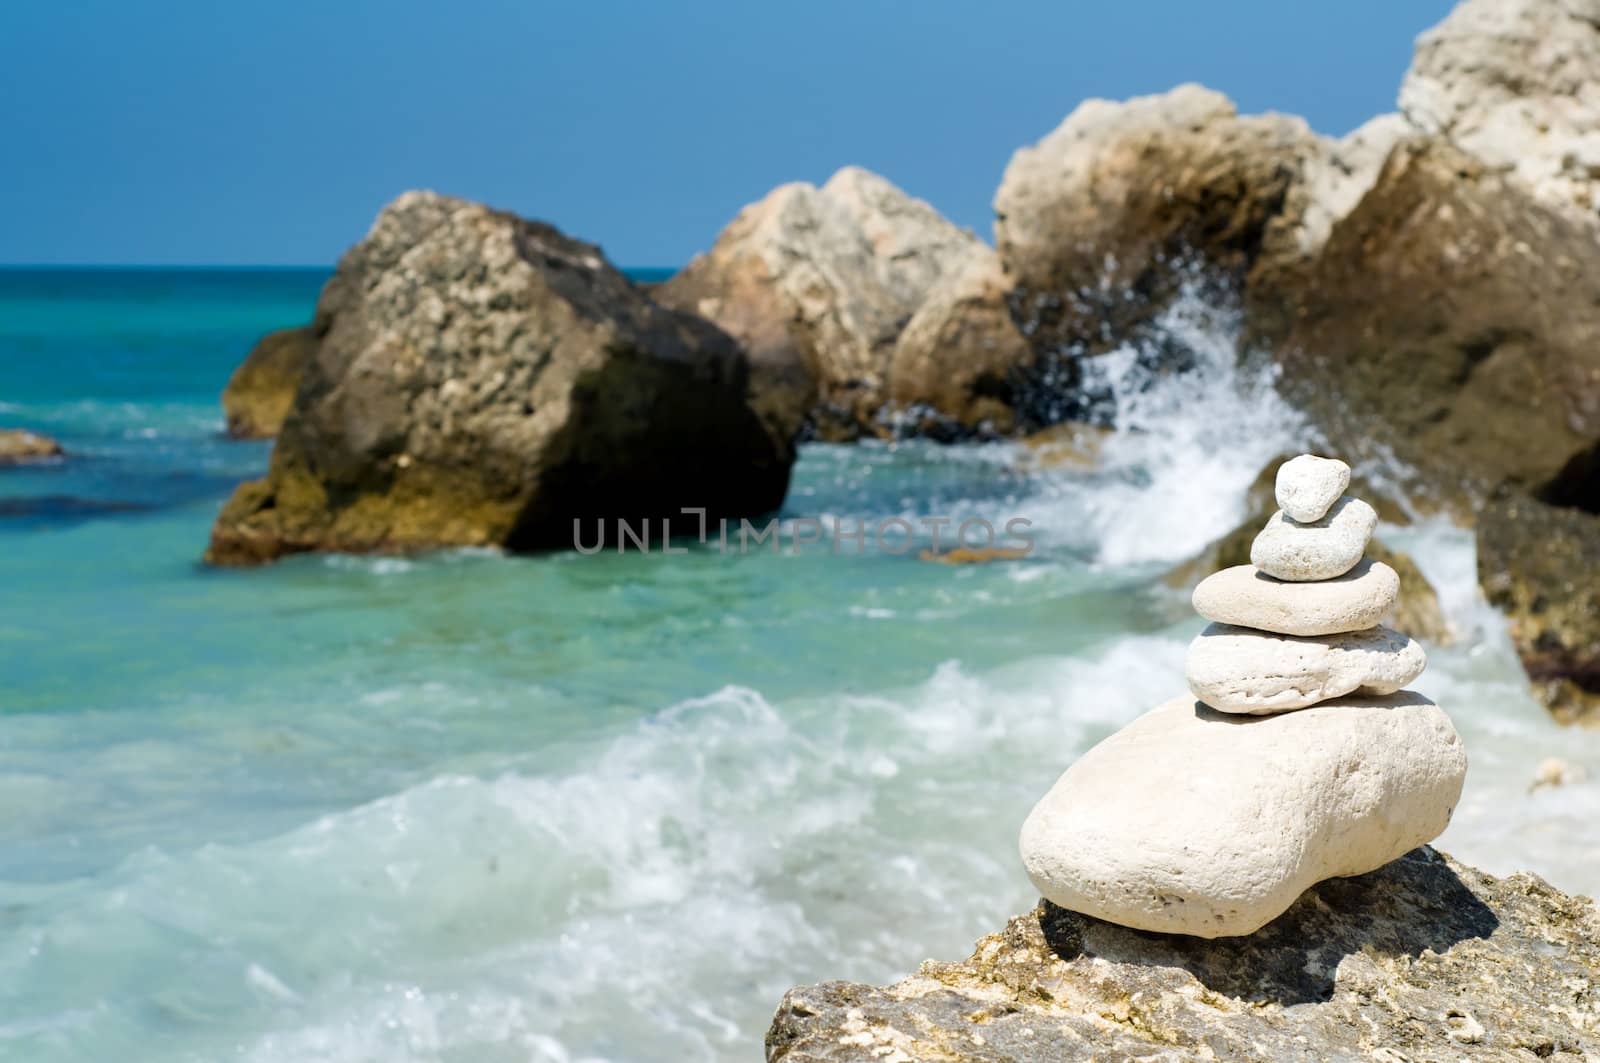 stacked limestone pebbles on the beach, blurred background